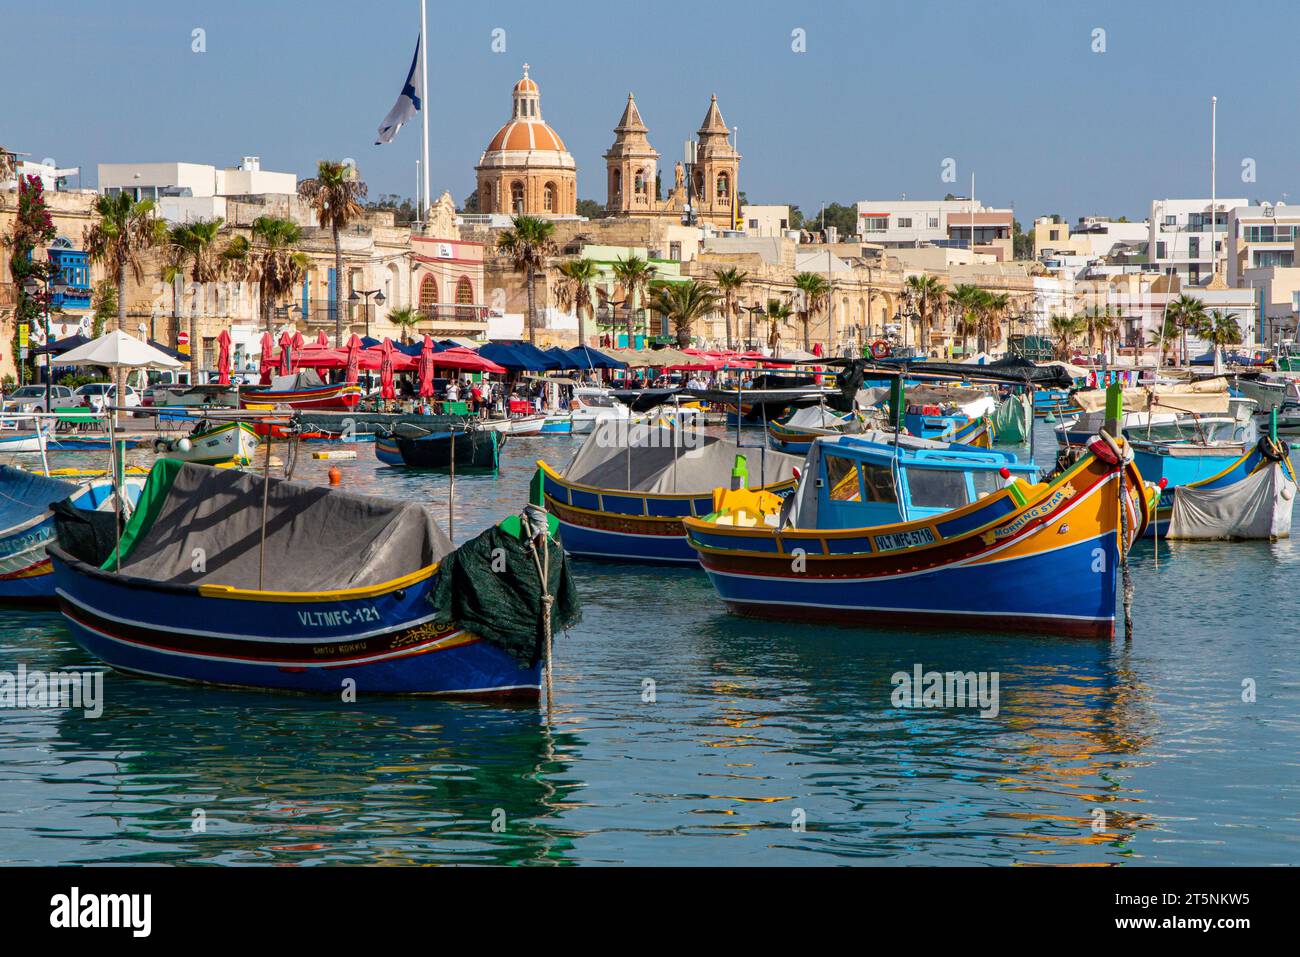 The coloured boats in Marsaxlokk Harbour and Church of our Lady. Malta Stock Photo